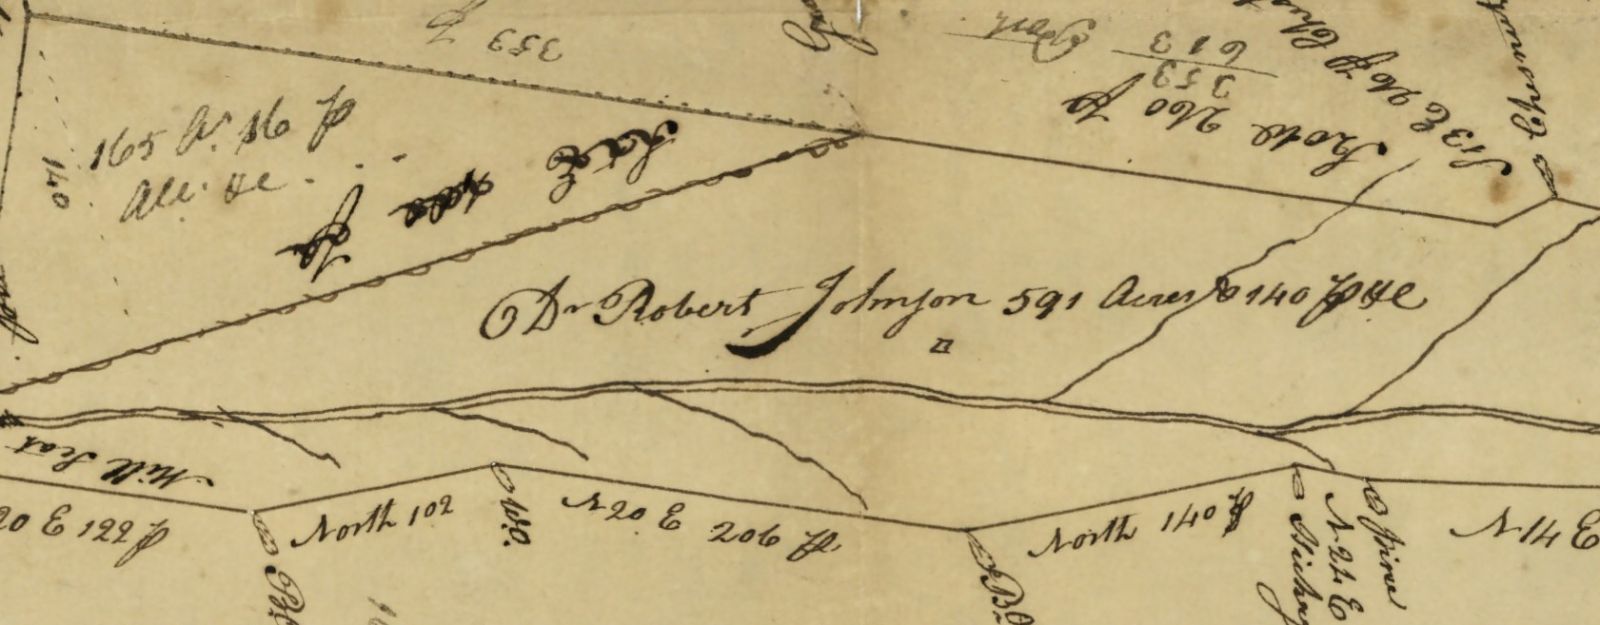 Survey of some of Johnston's land.